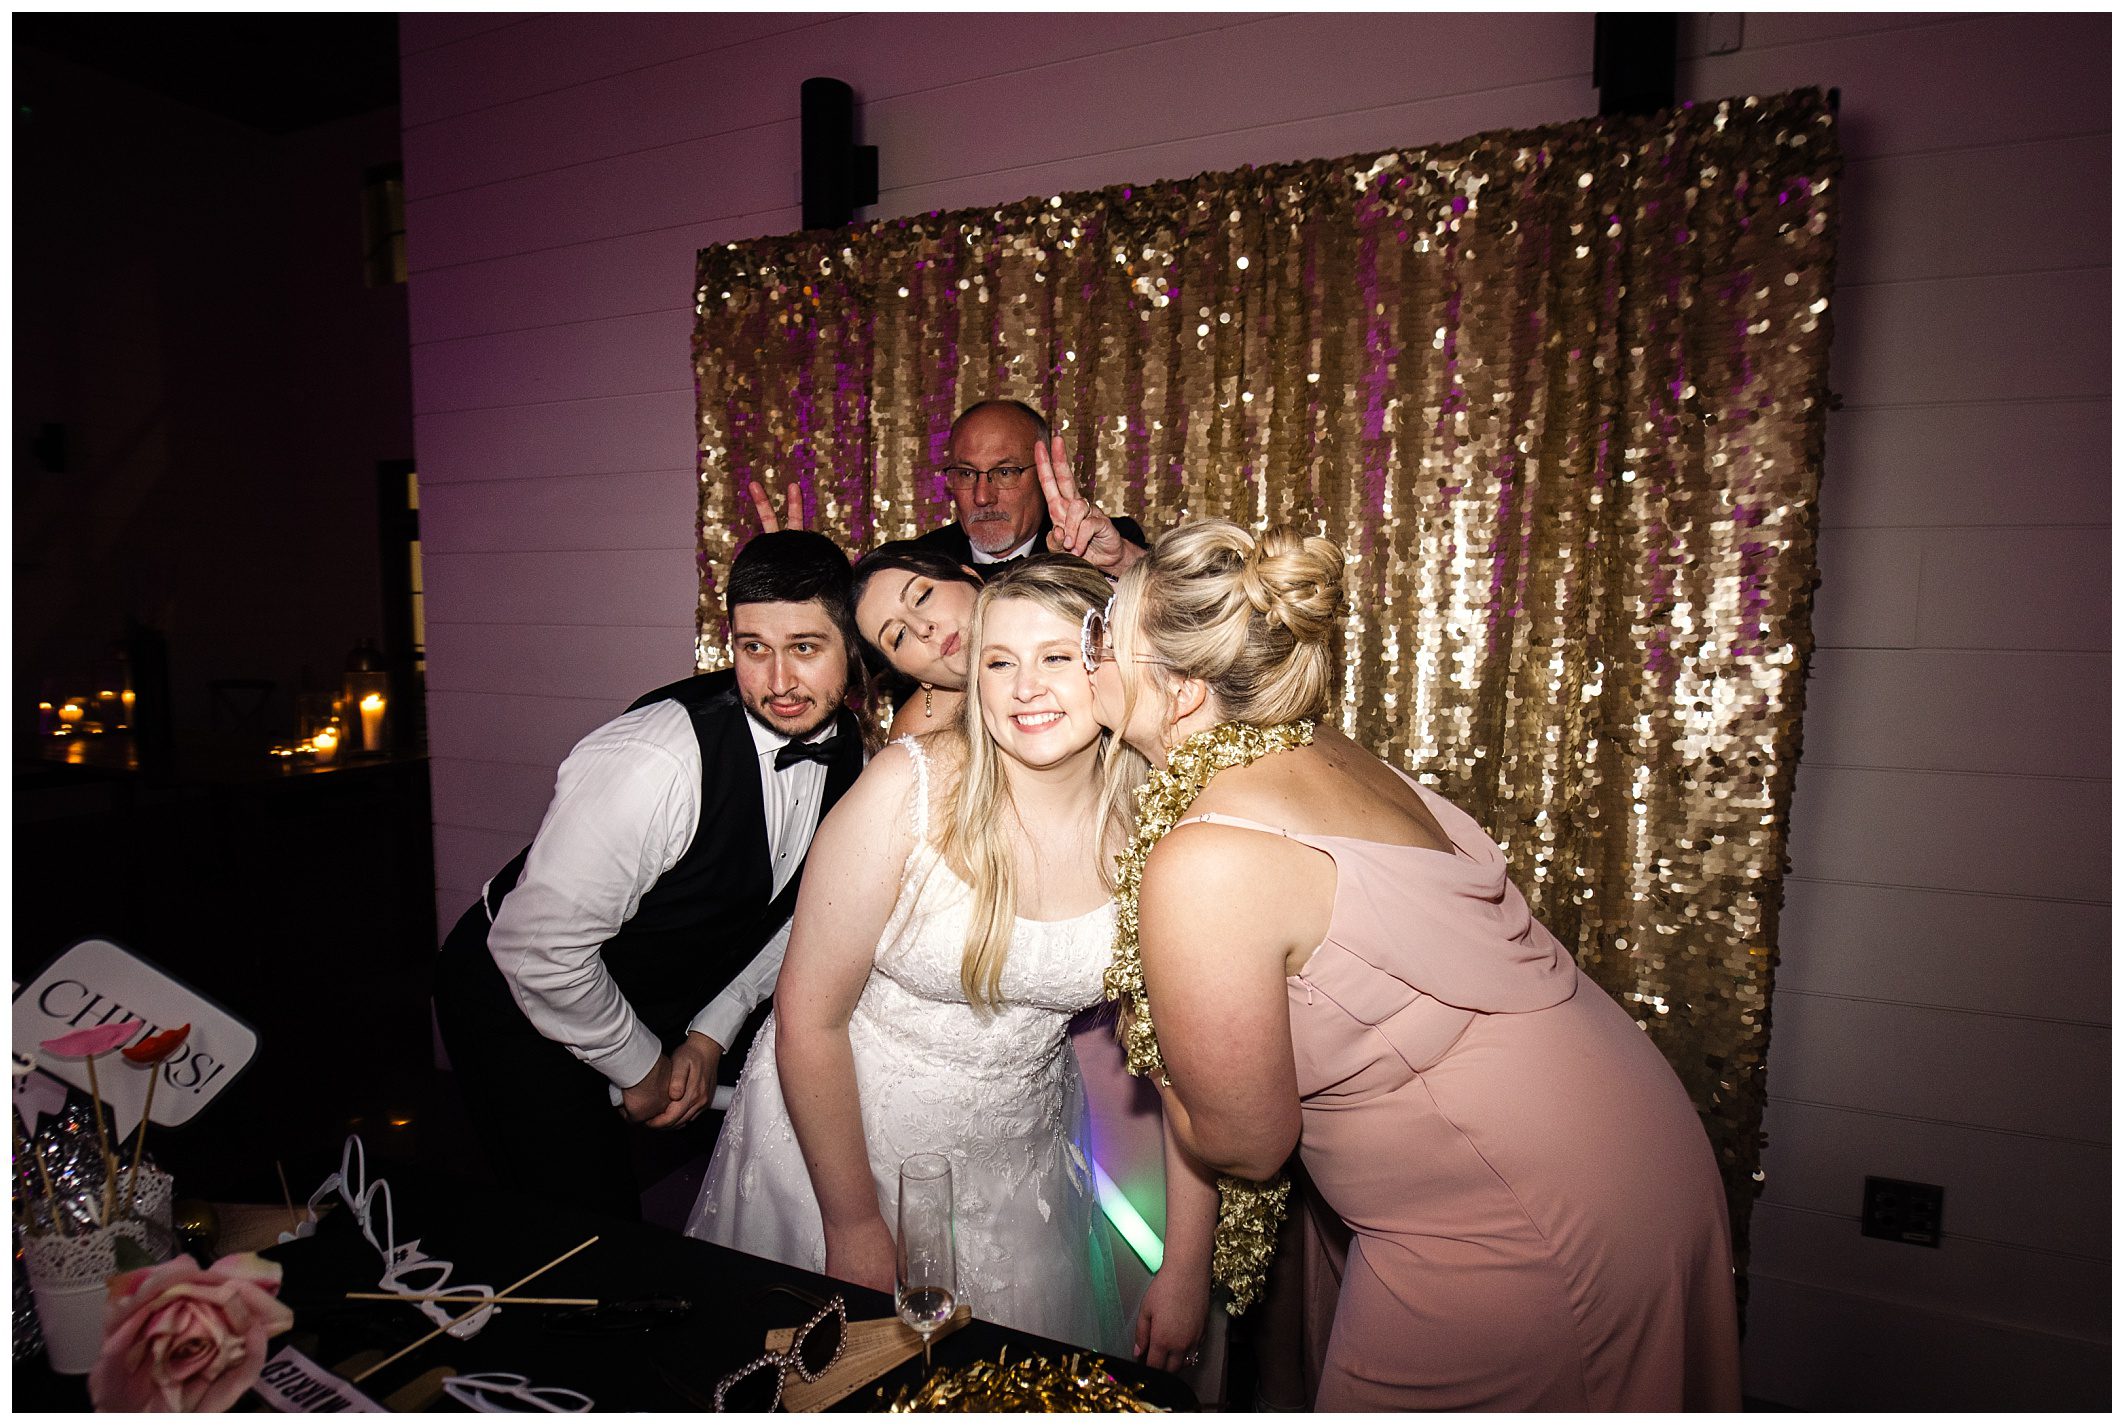 Group of people, including a bride, posing for a photo at a mountain wedding reception with a gold sequin backdrop.